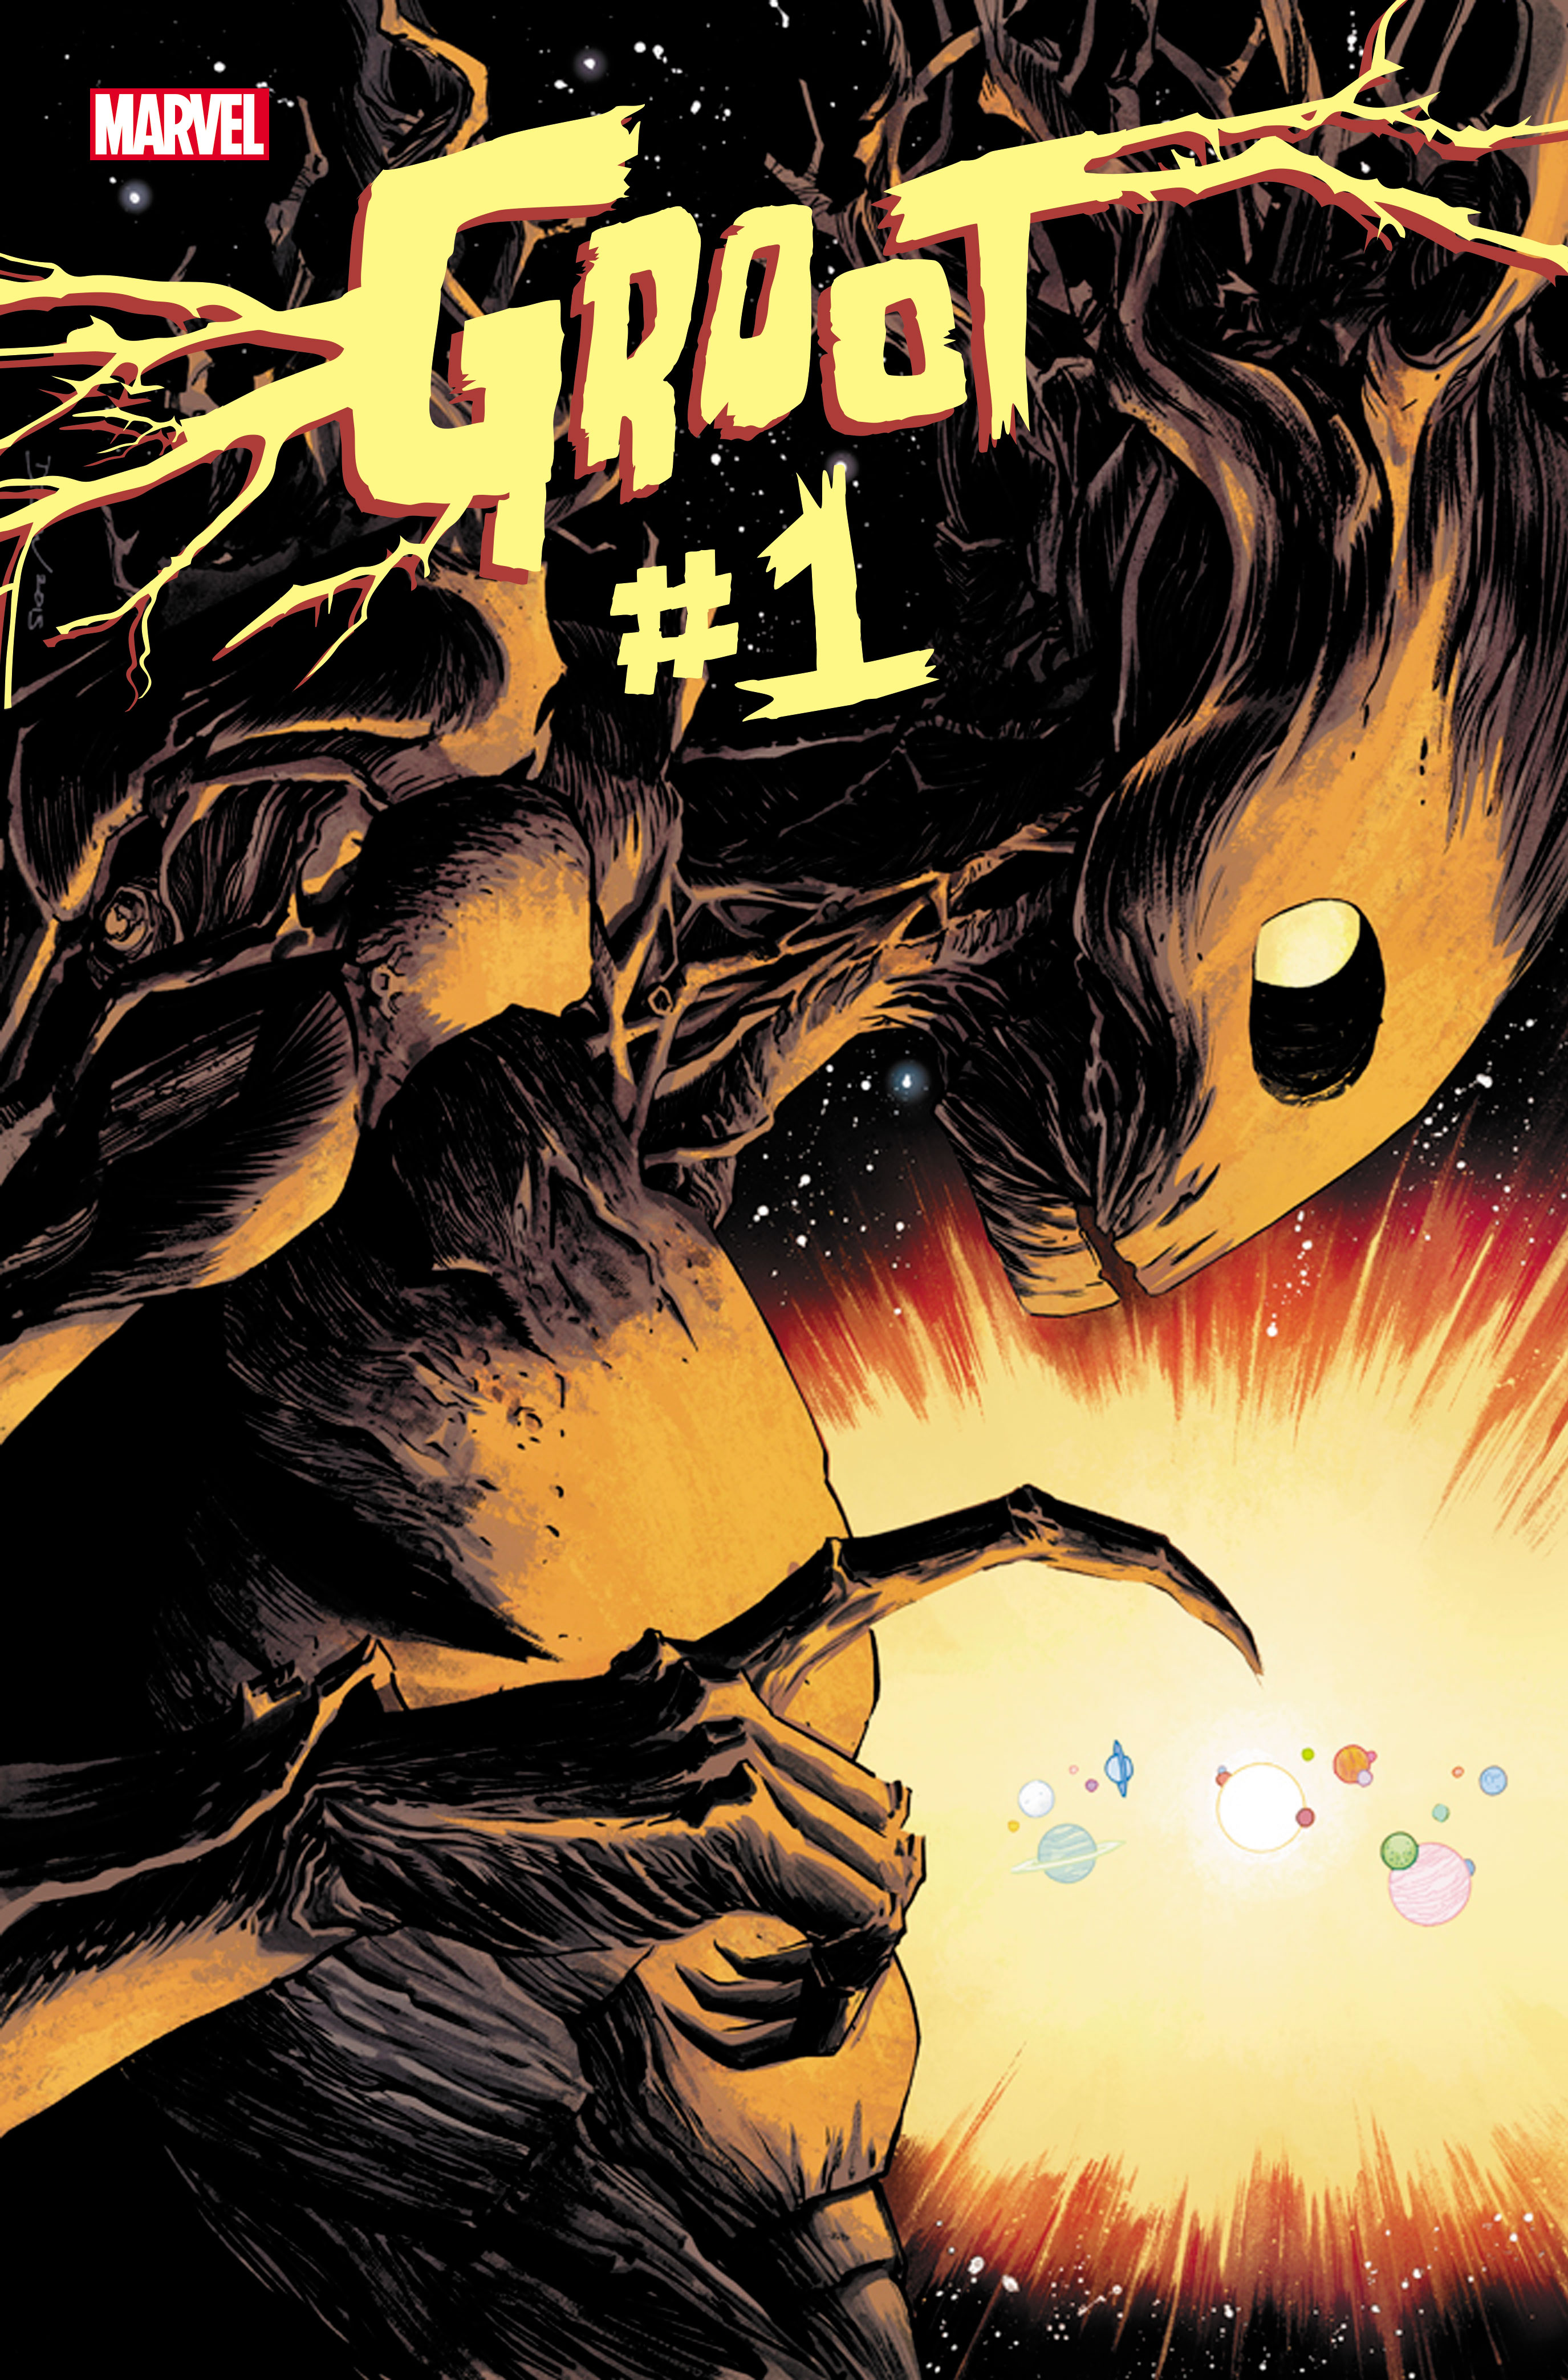 Groot #1 Preview